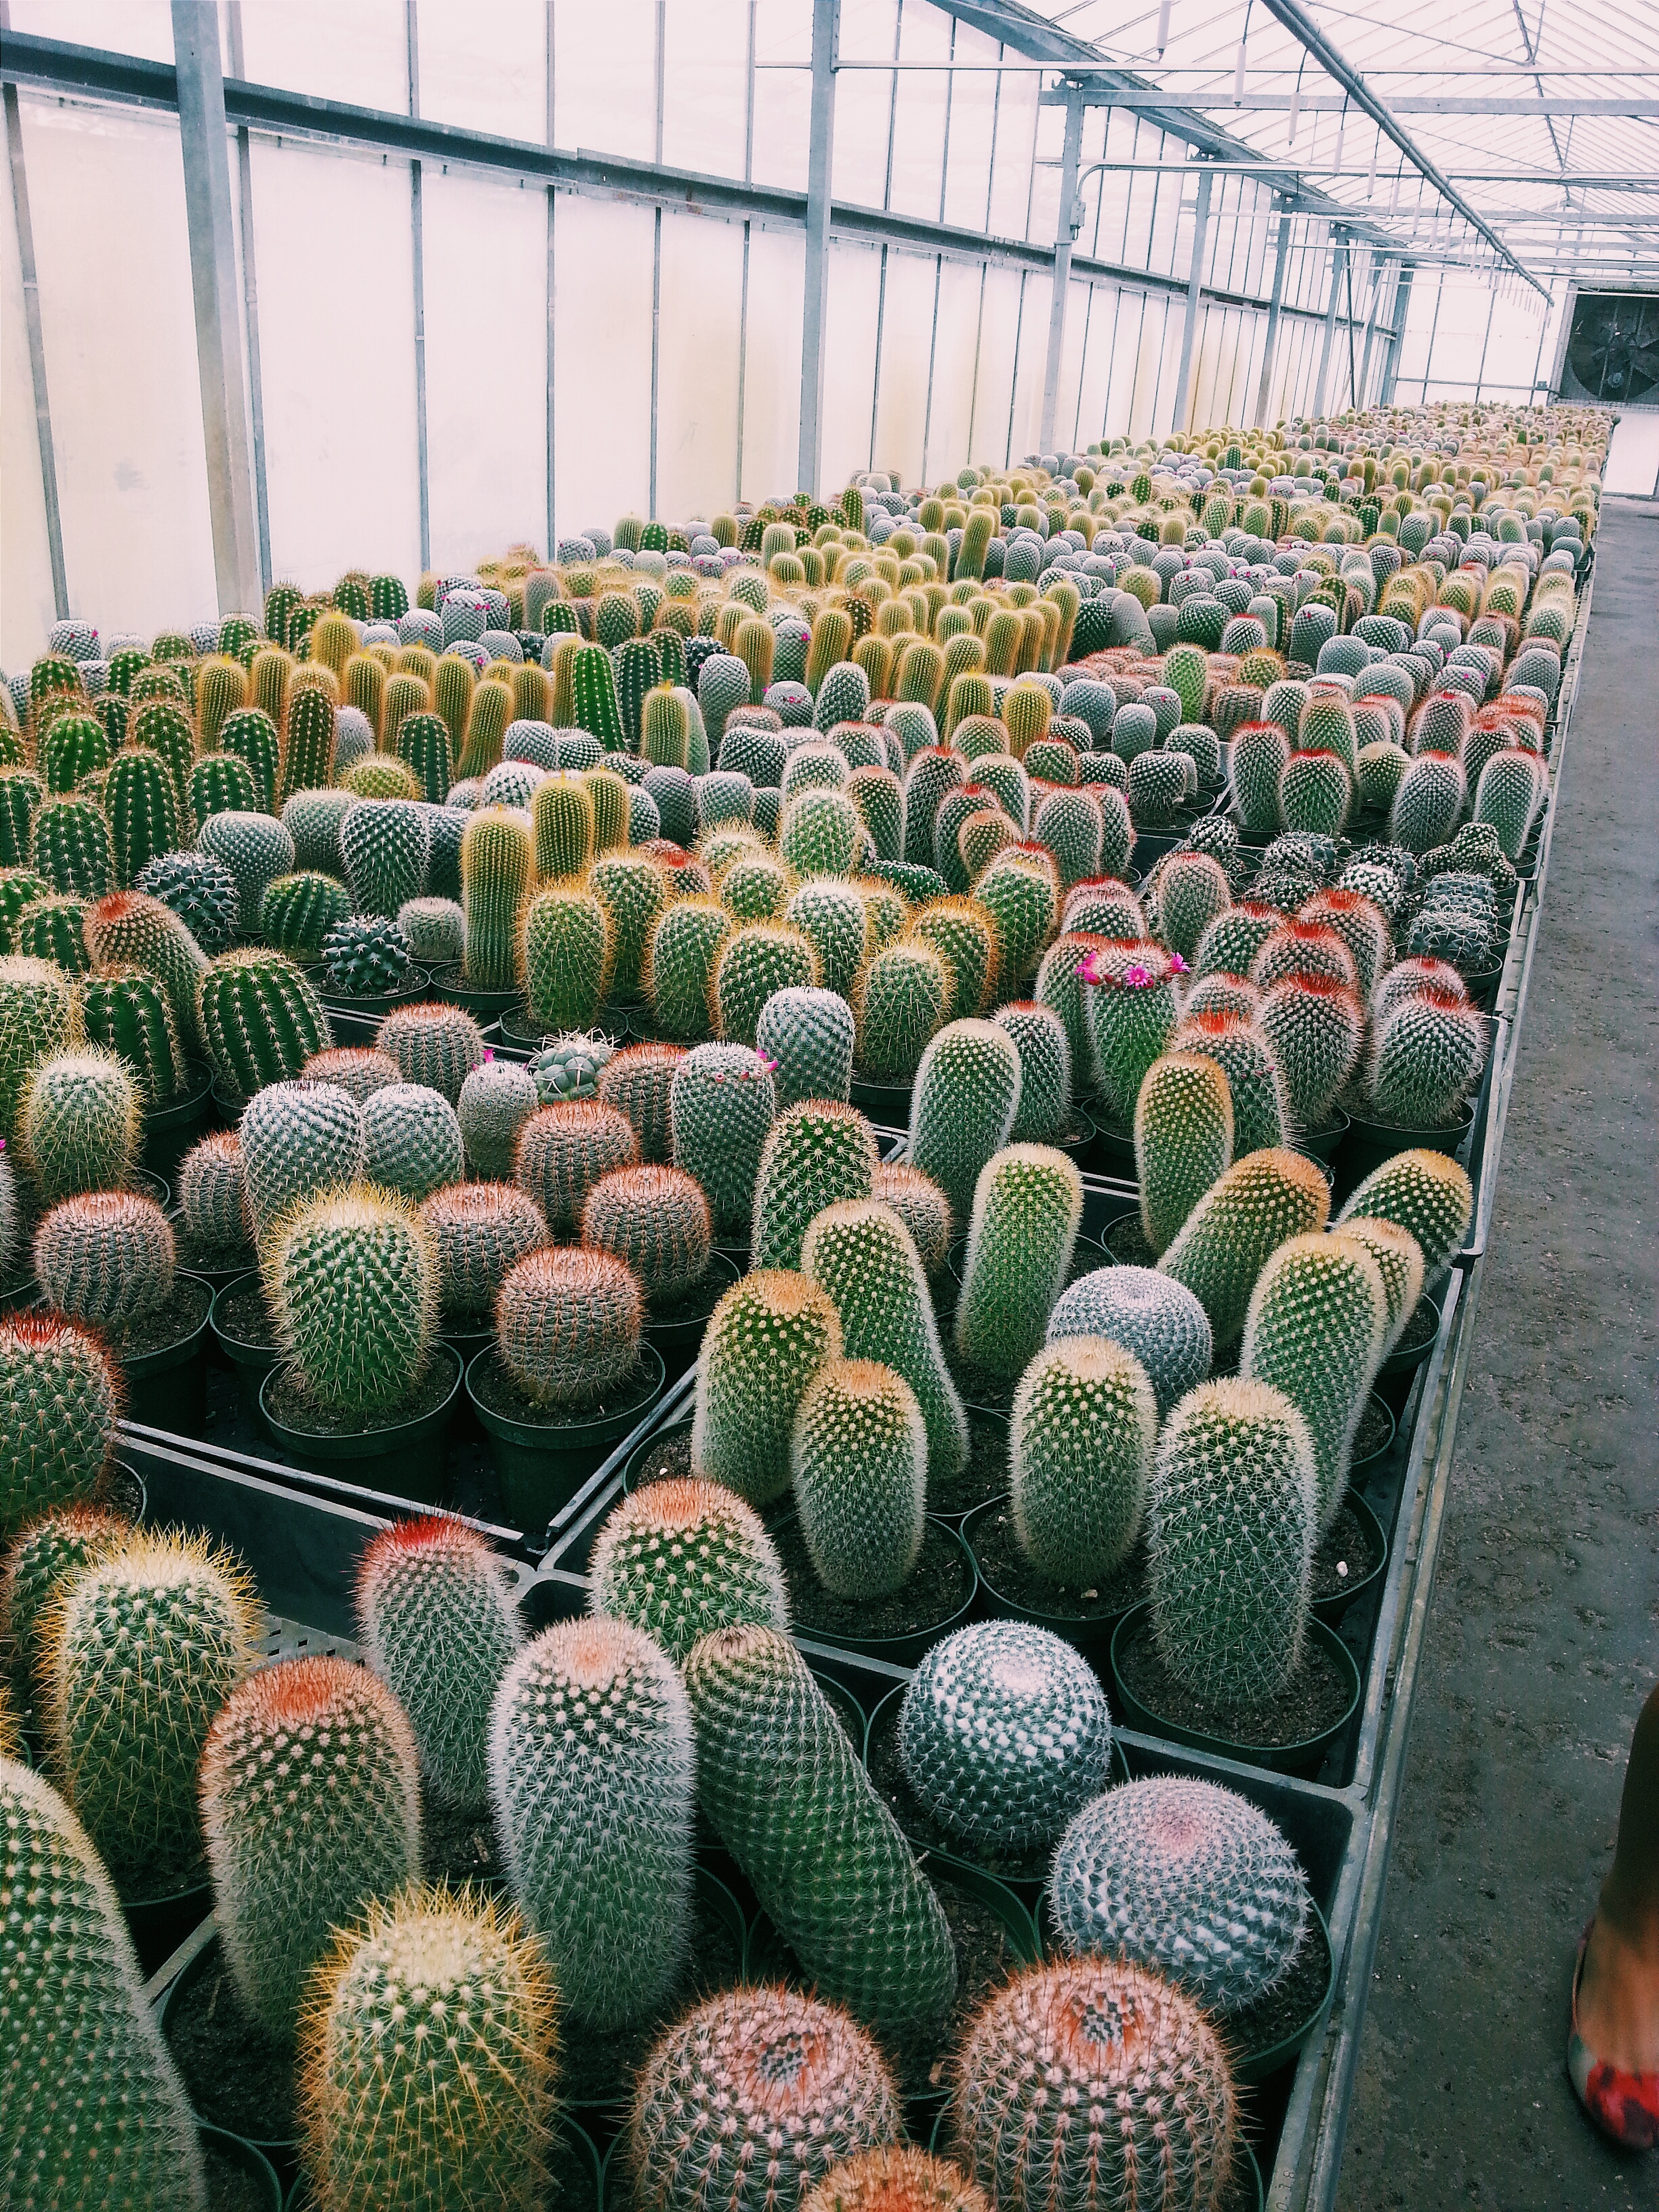 A trip to Florida Cactus Inc. in Apoka, FL. The truth is out there ...